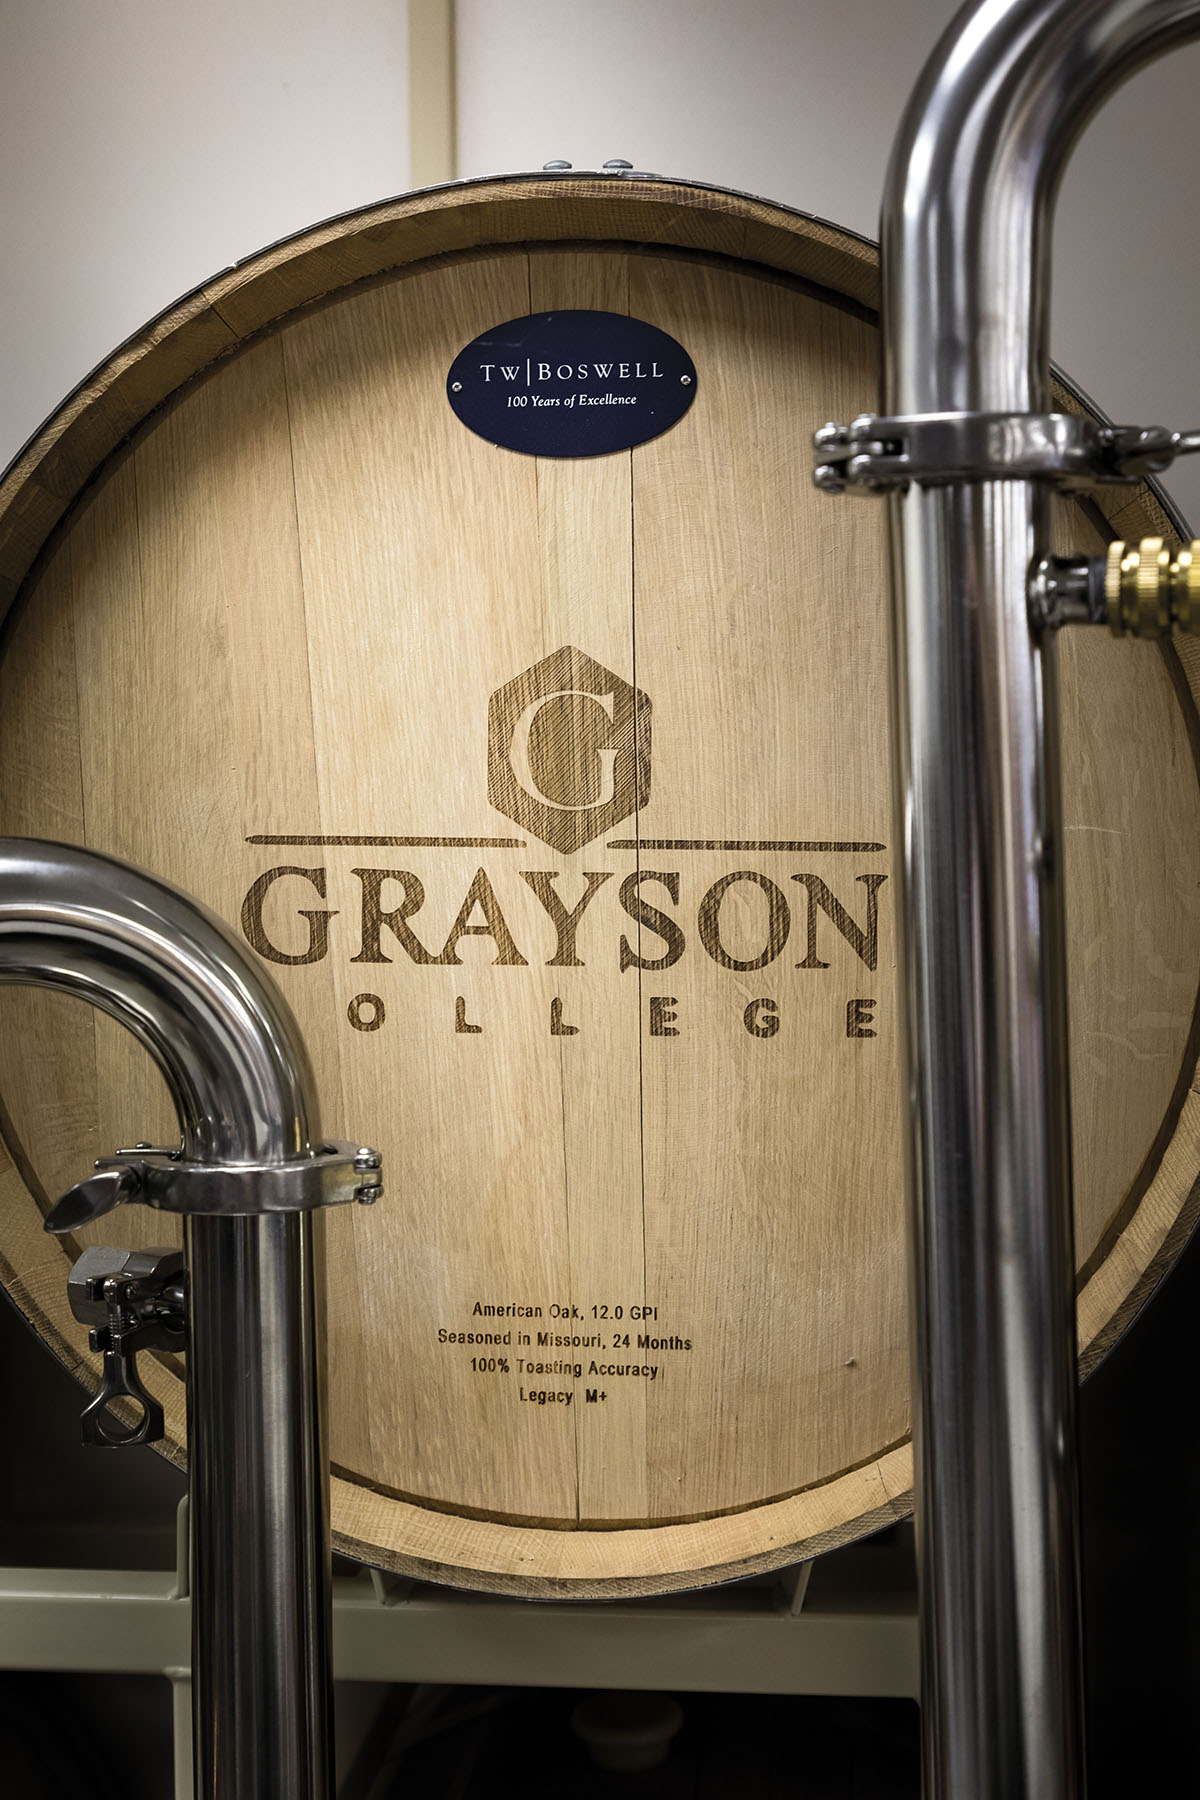 A wine barrel stamped with "Grayson College" at the Grayson College Munson Center